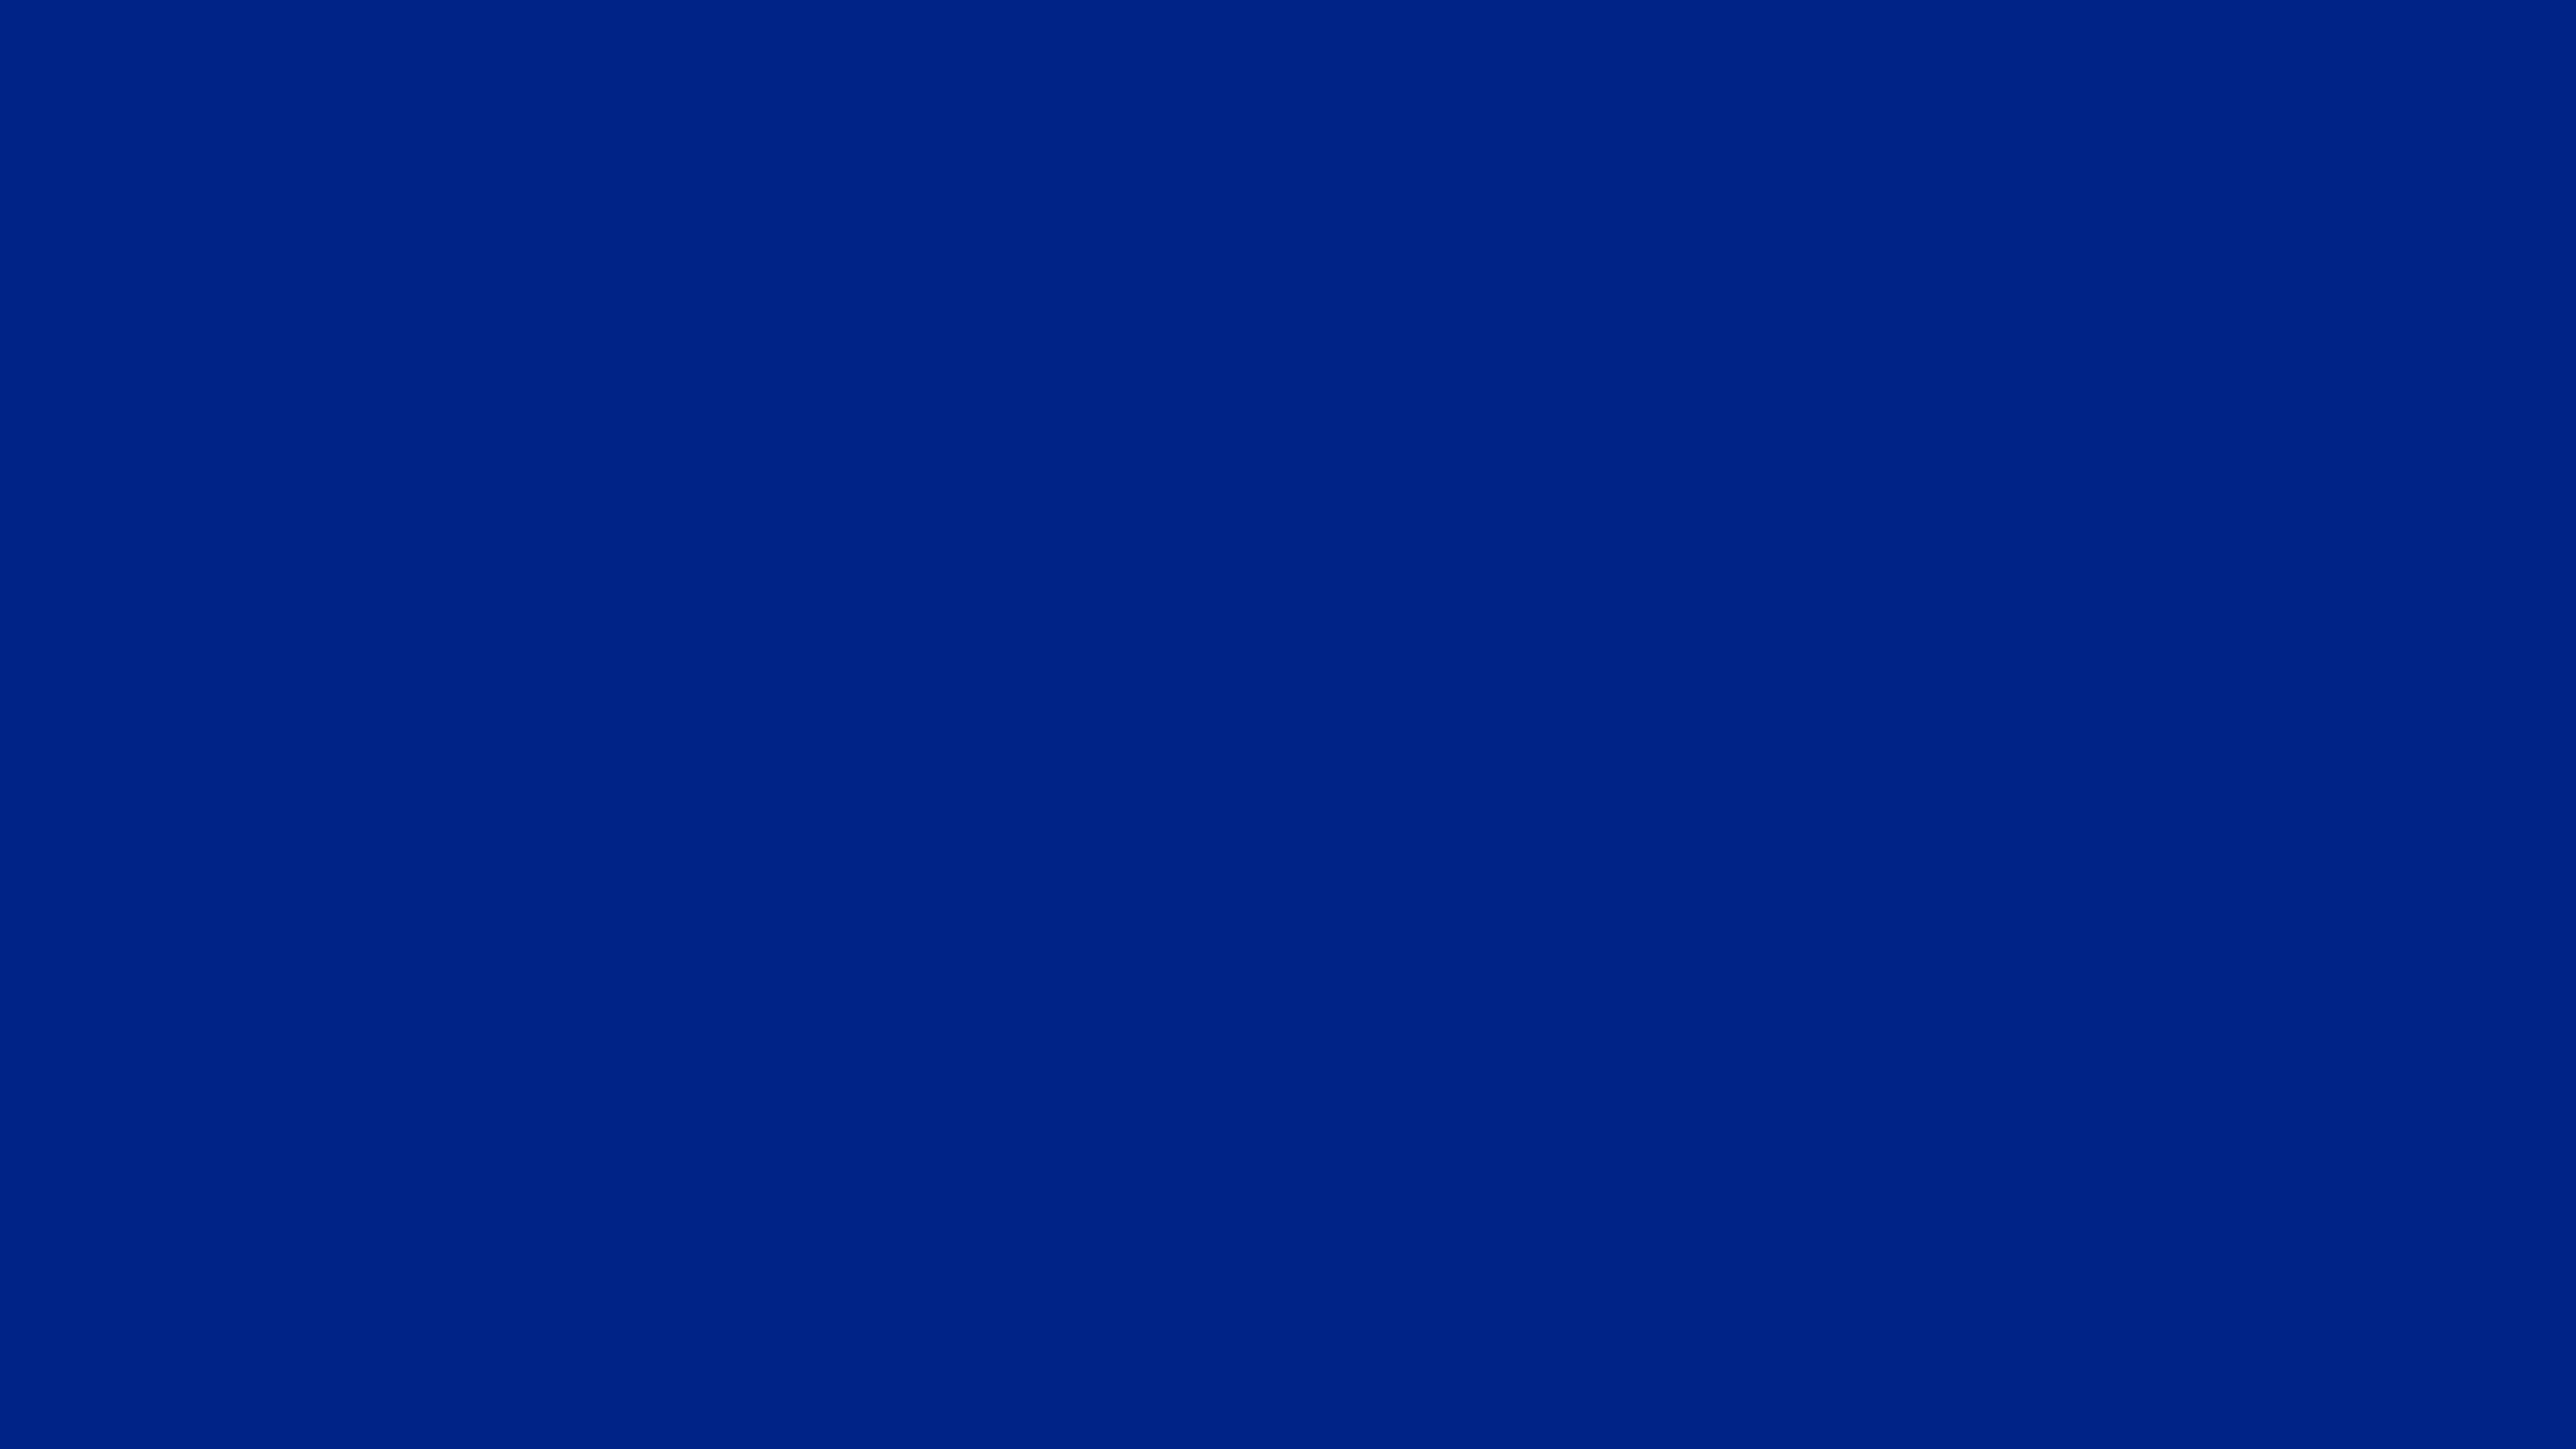 4096x2304 Resolution Blue Solid Color Background